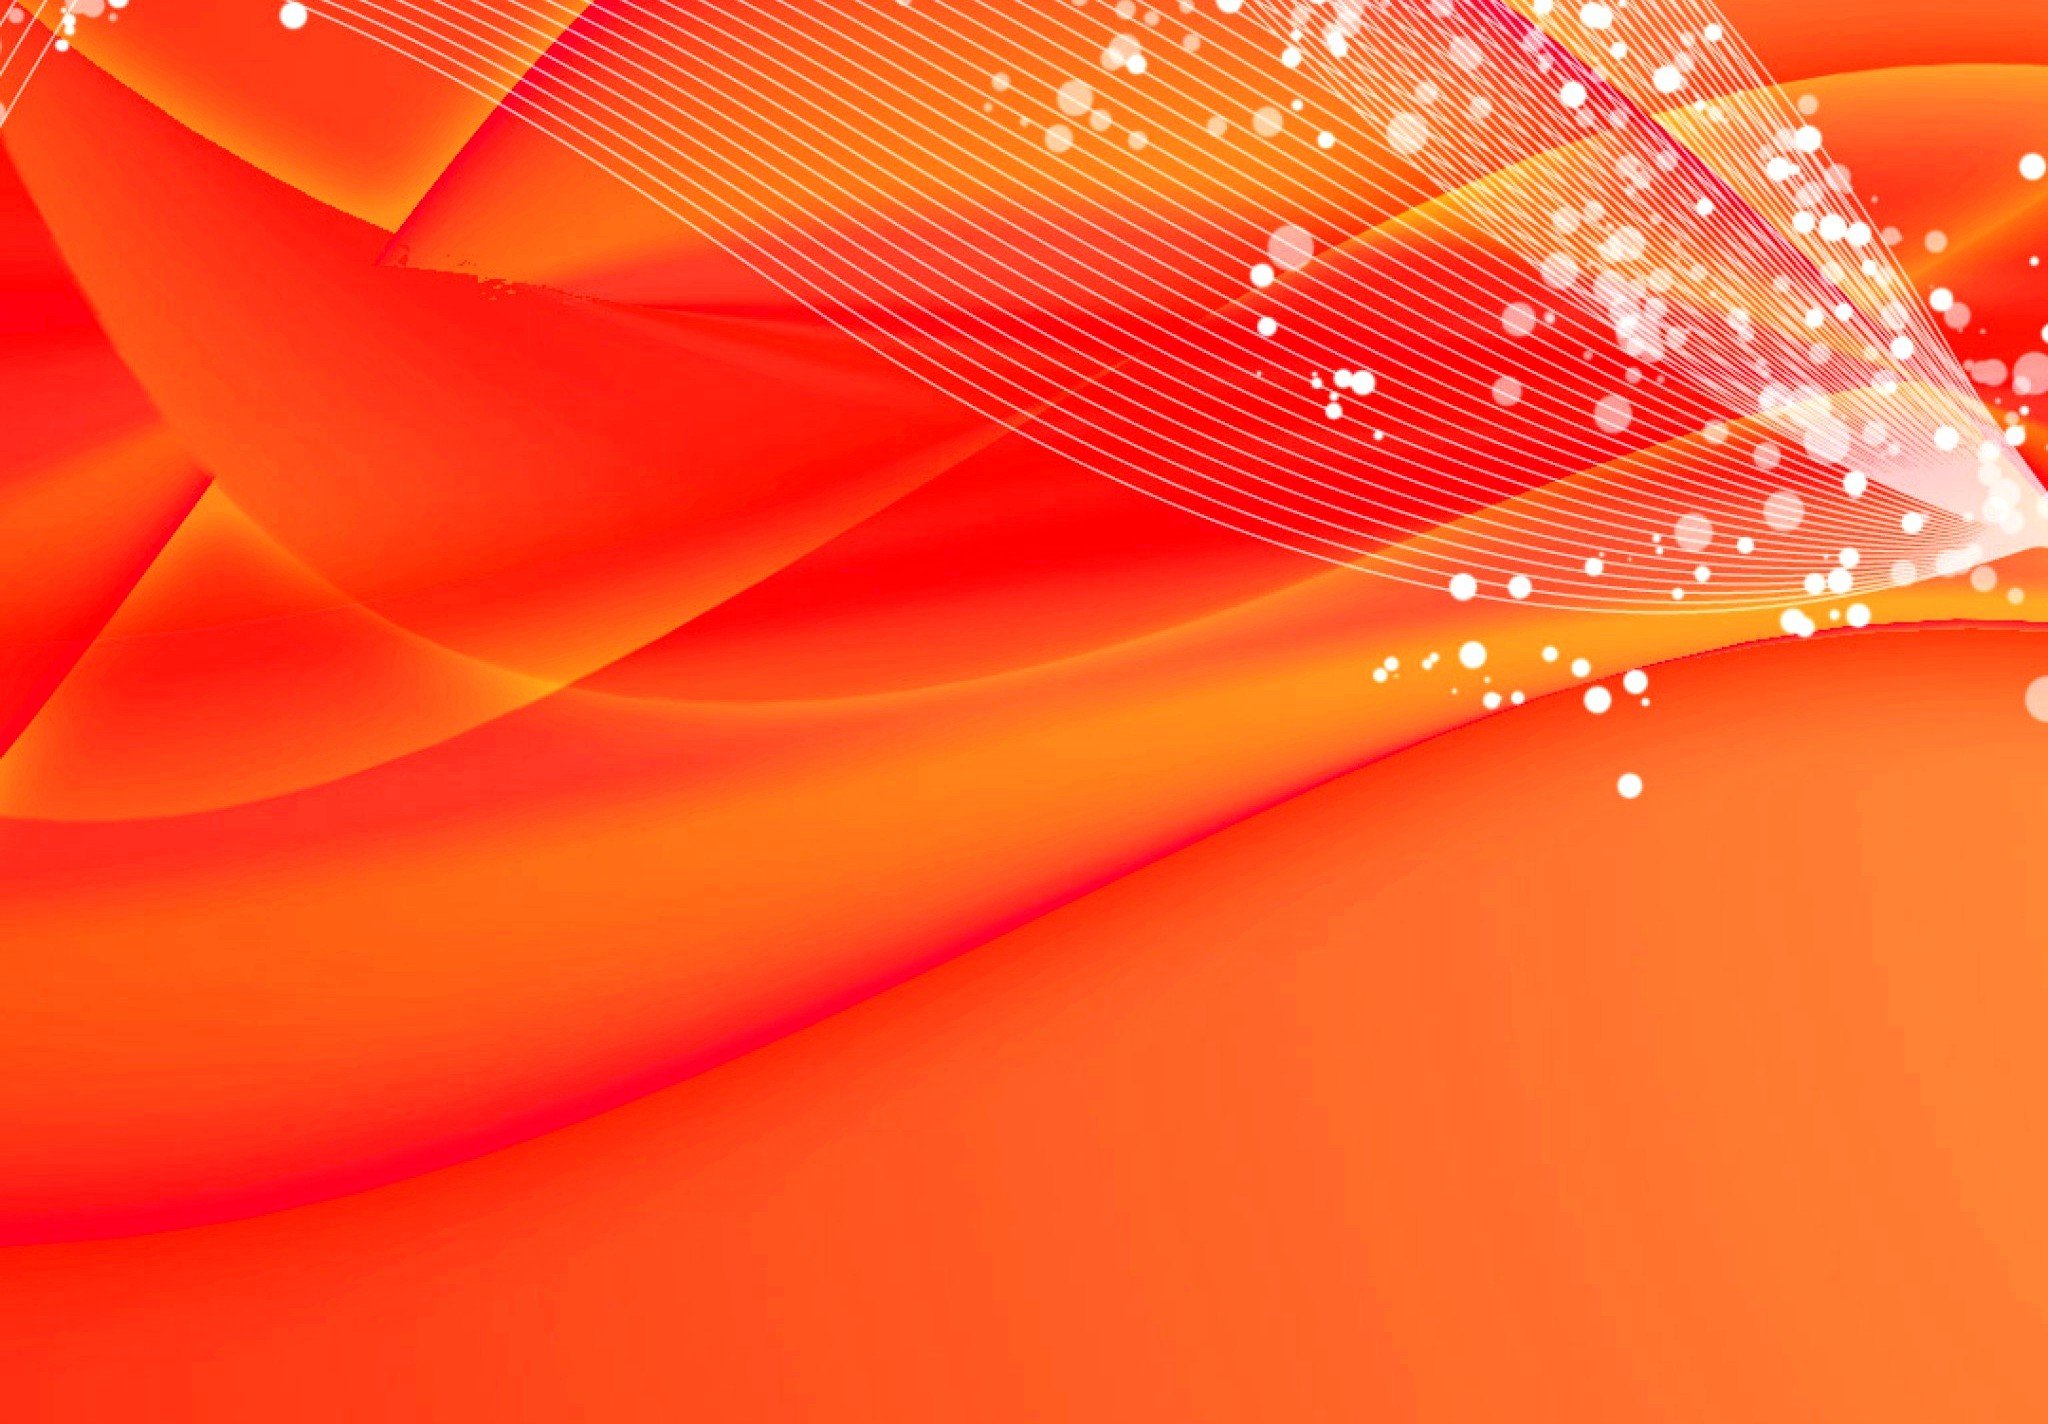 2048x1424 Wallpaper Orange Pink Lines Bubbles | Free Images at Clker .